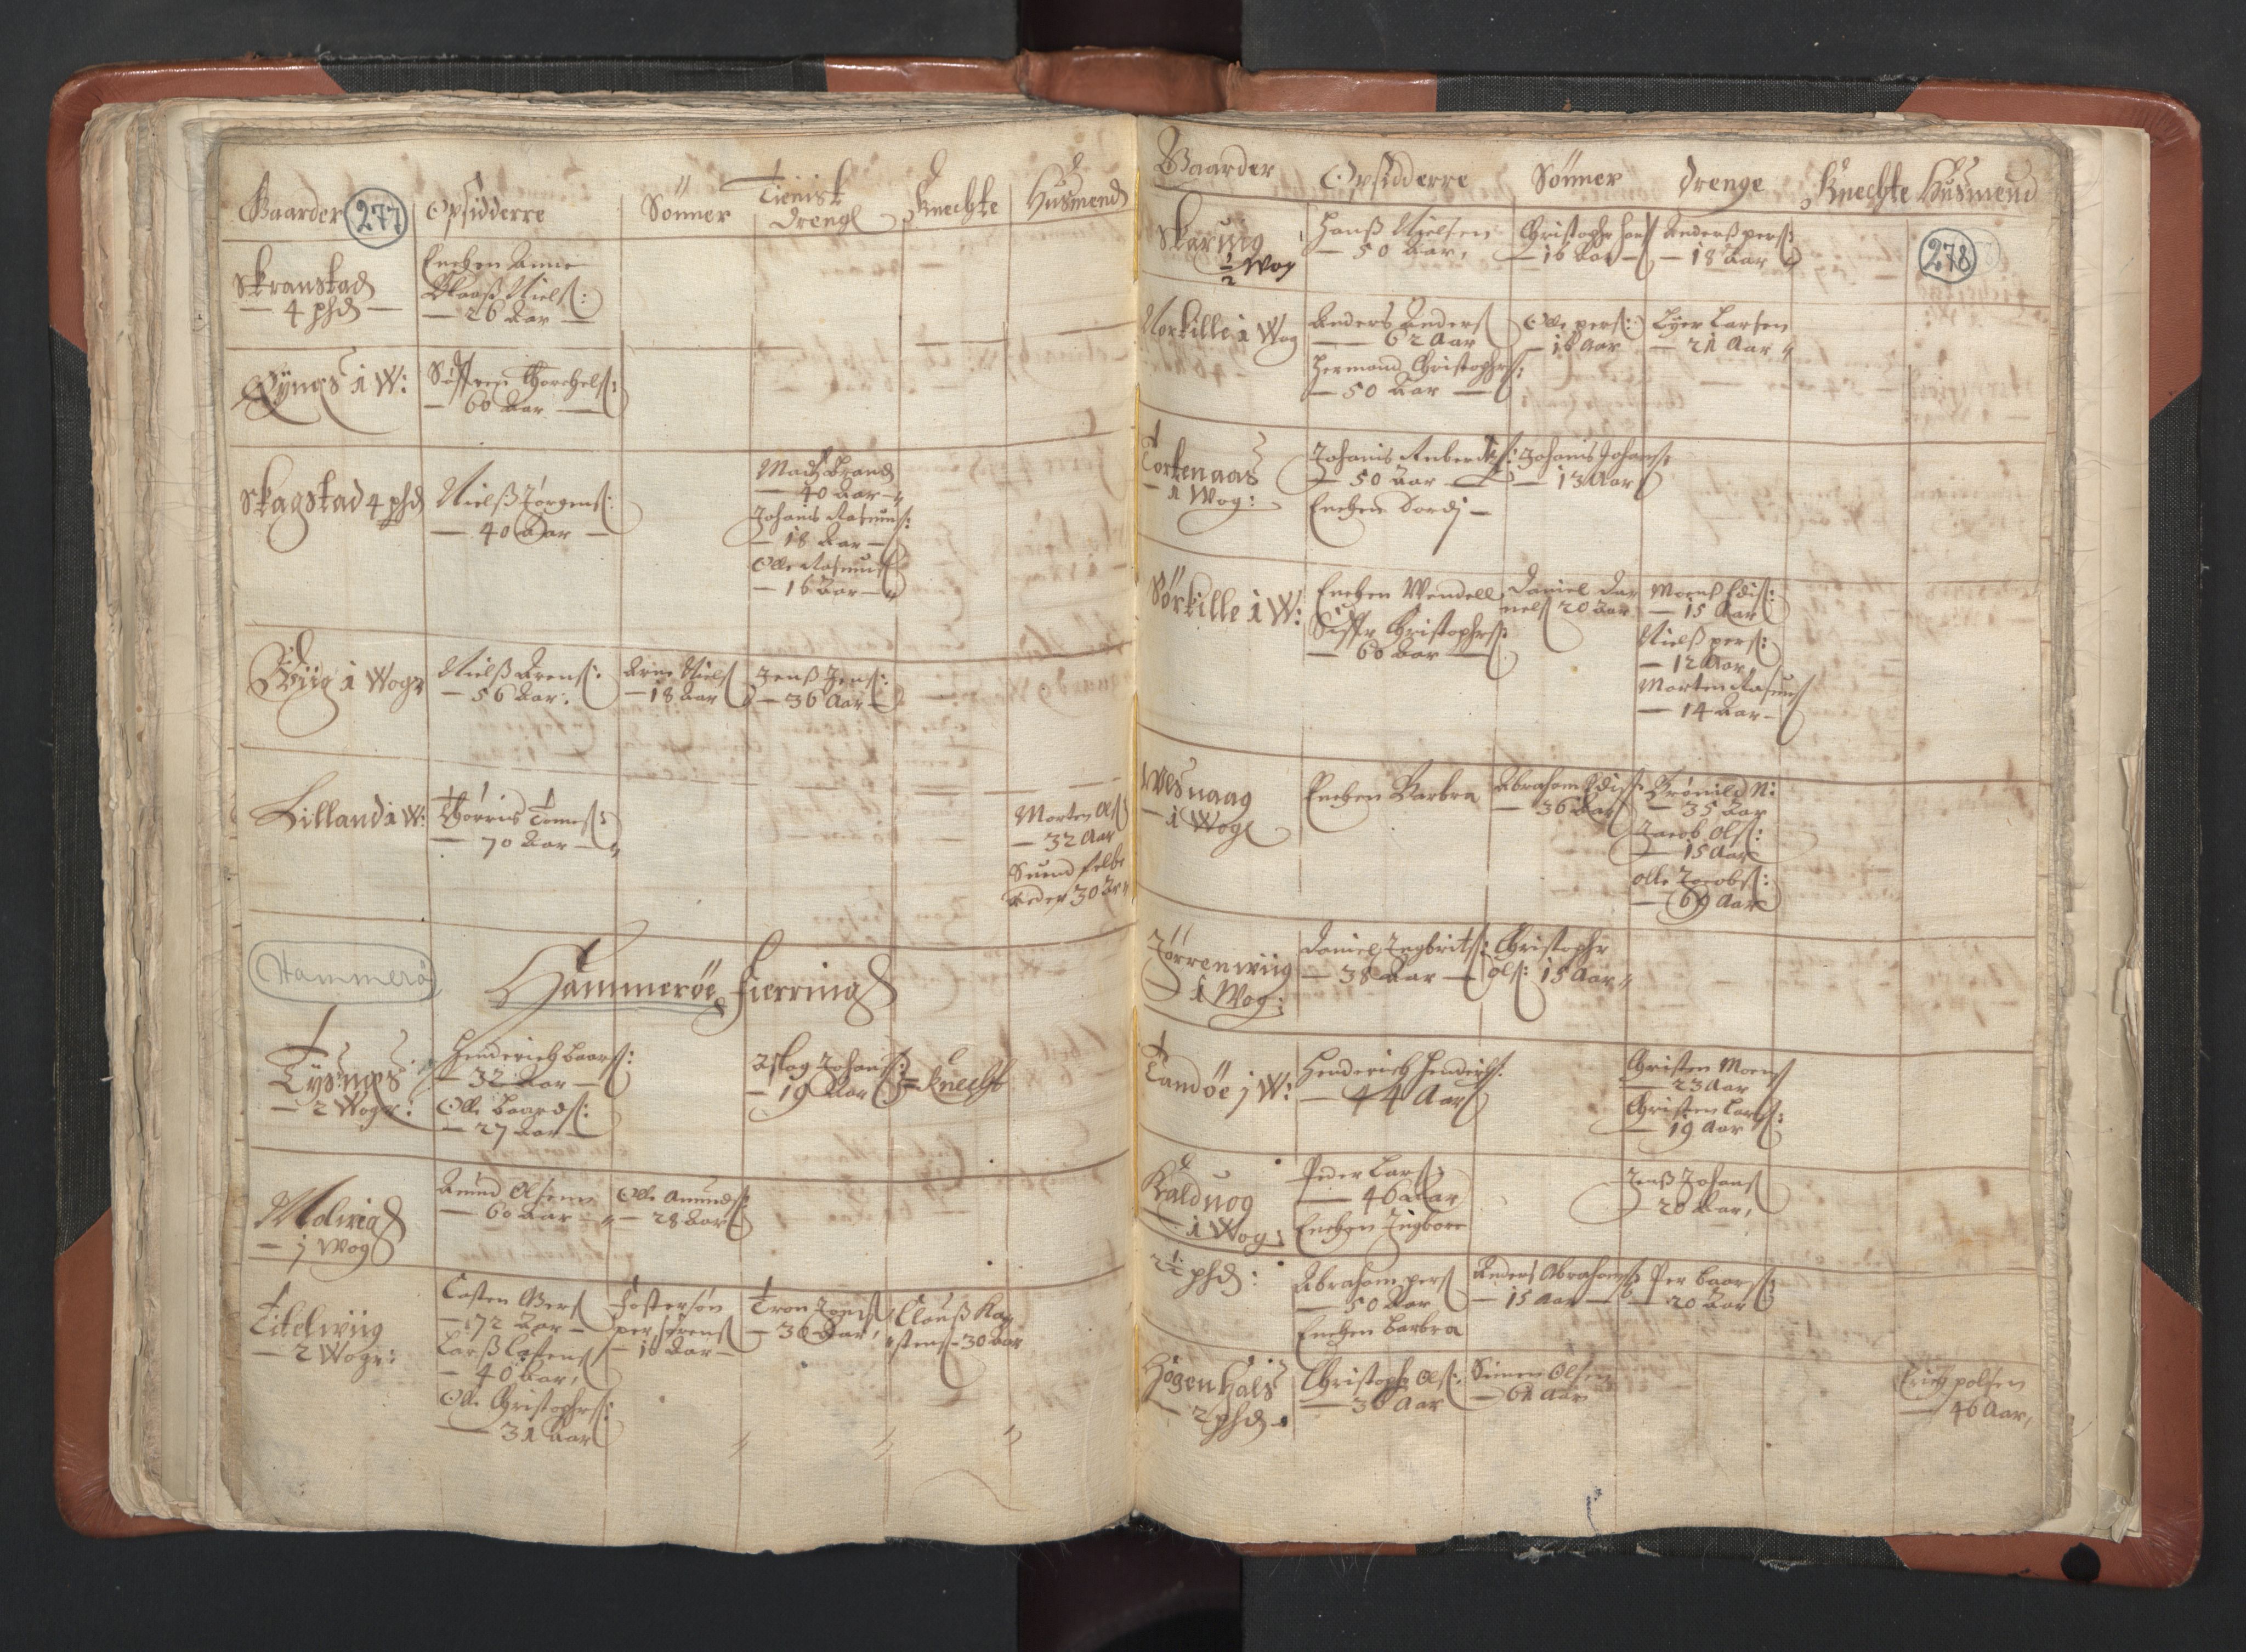 RA, Vicar's Census 1664-1666, no. 35: Helgeland deanery and Salten deanery, 1664-1666, p. 277-278